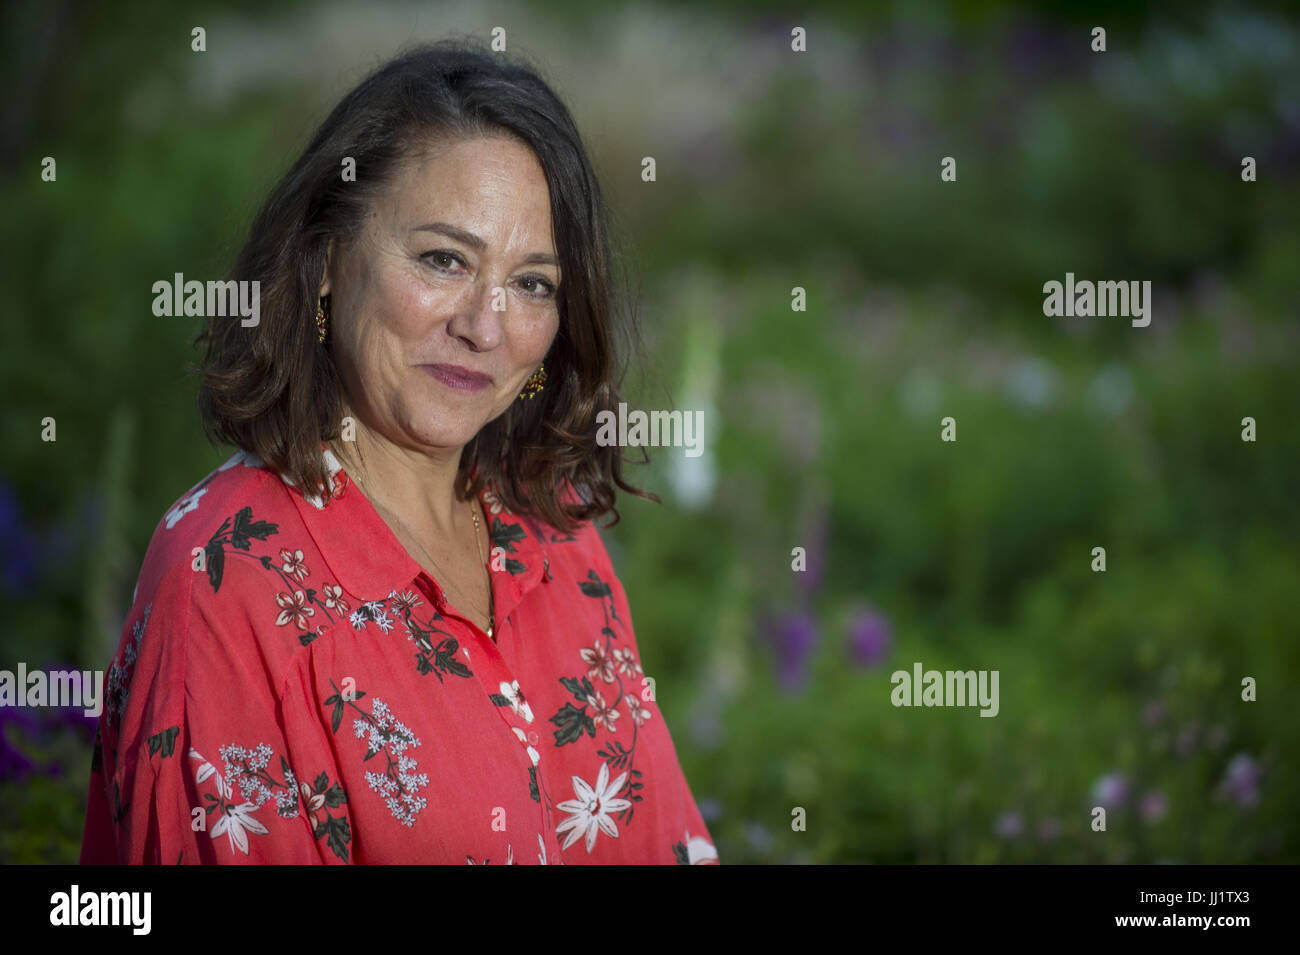 Arabella Weir sits for portraits as she attends the 'Borders Book Festival' in Melrose.  Featuring: Arabella Weir Where: Melrose, United Kingdom When: 16 Jun 2017 Credit: Euan Cherry/WENN.com Stock Photo